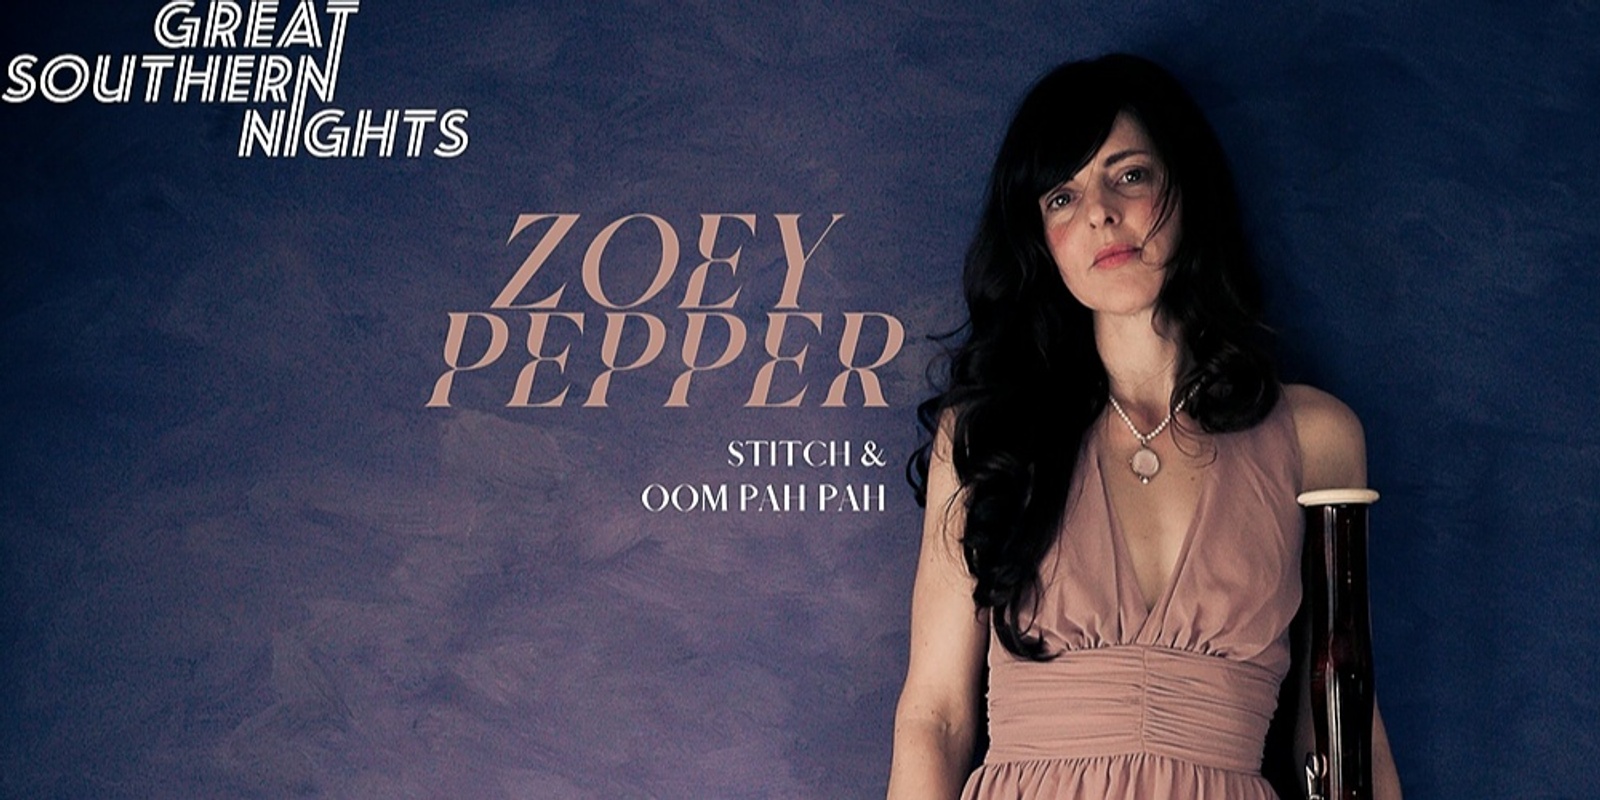 Banner image for Zoey Pepper